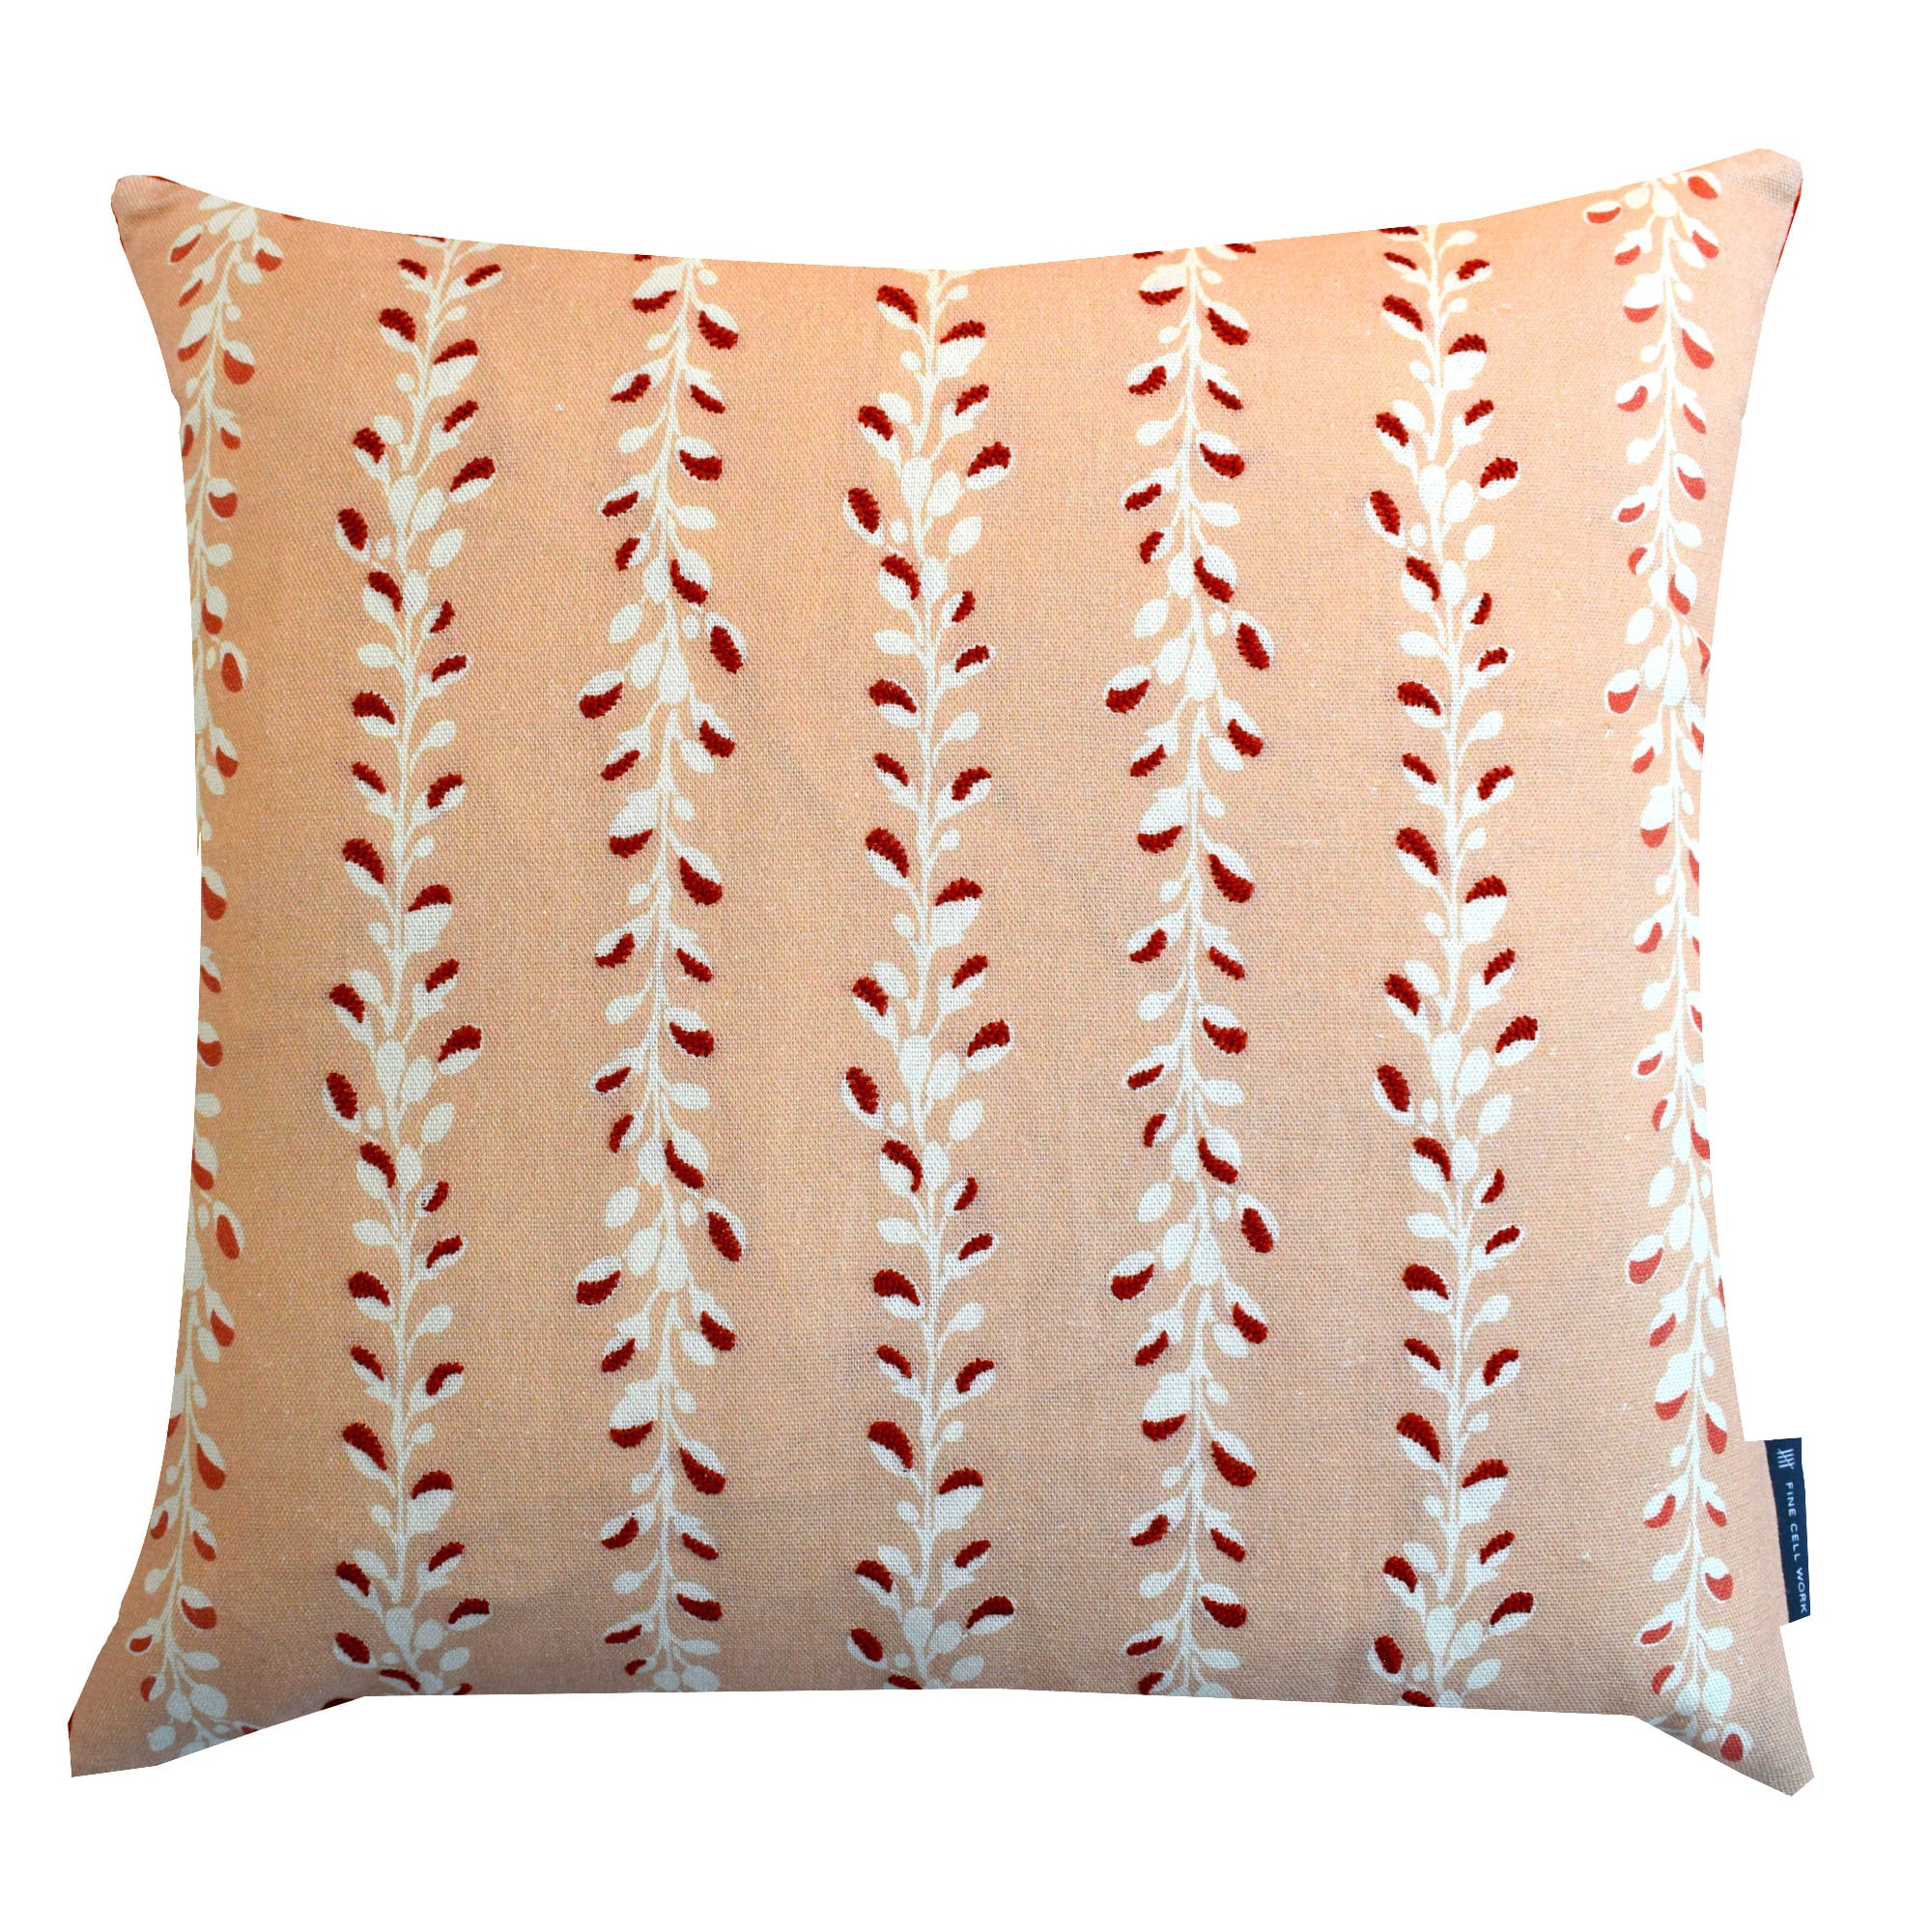 Joy-of-Print-Hand-Embroidered-lupin-cushion-coral-min.jpg